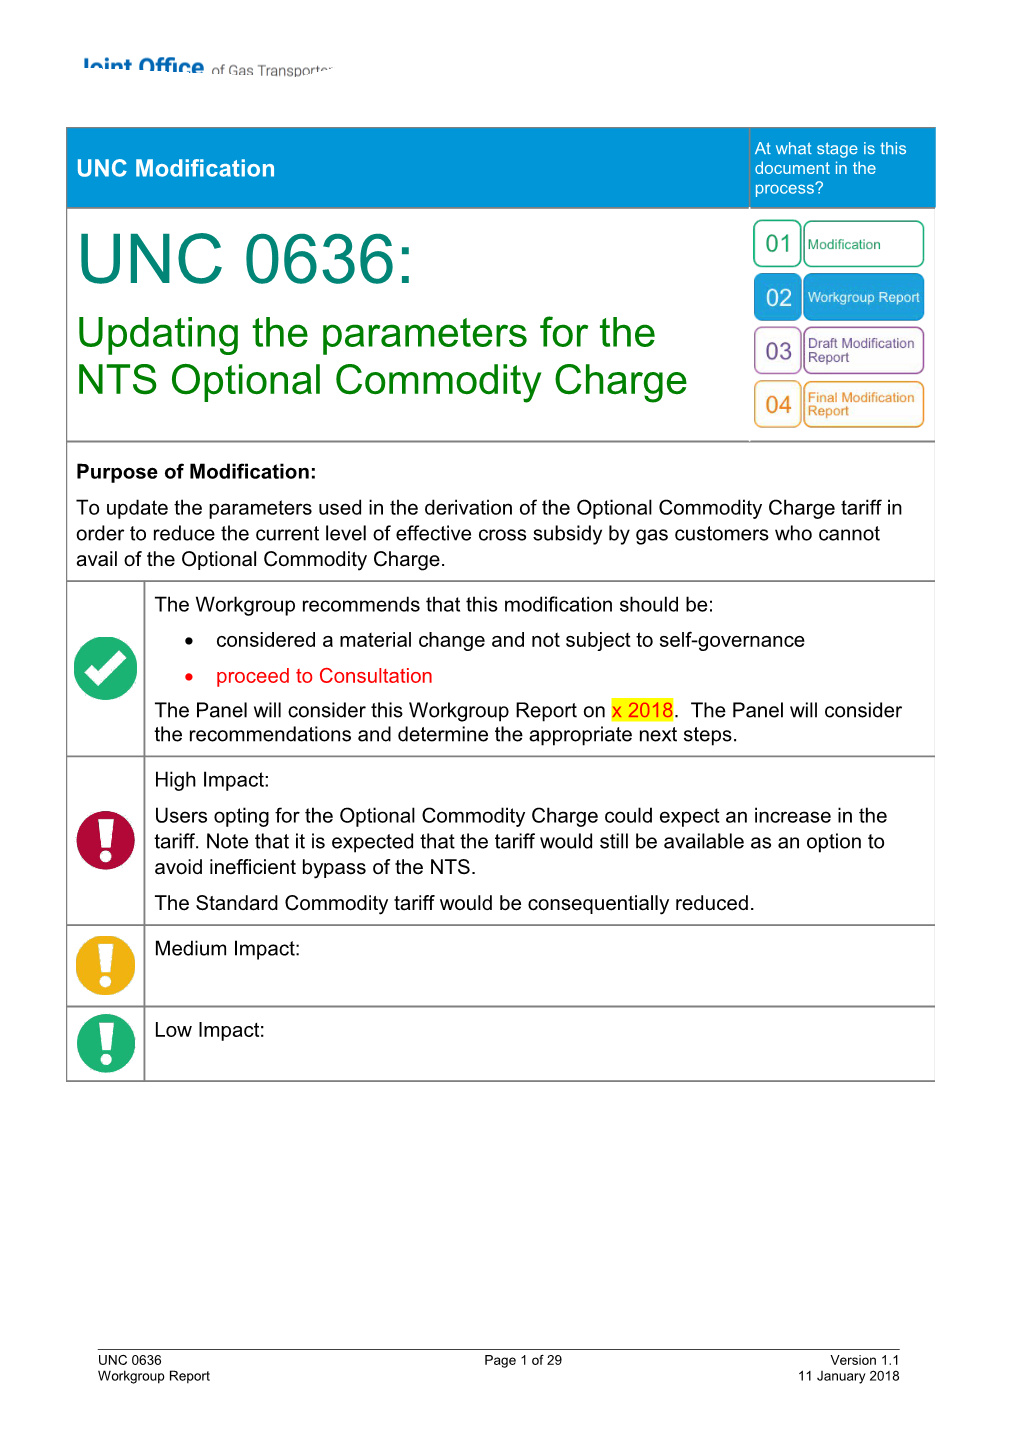 The NTS Optional Commodity Charge (OCC) Was Introduced in 1998 and the Tariff Has Not Been